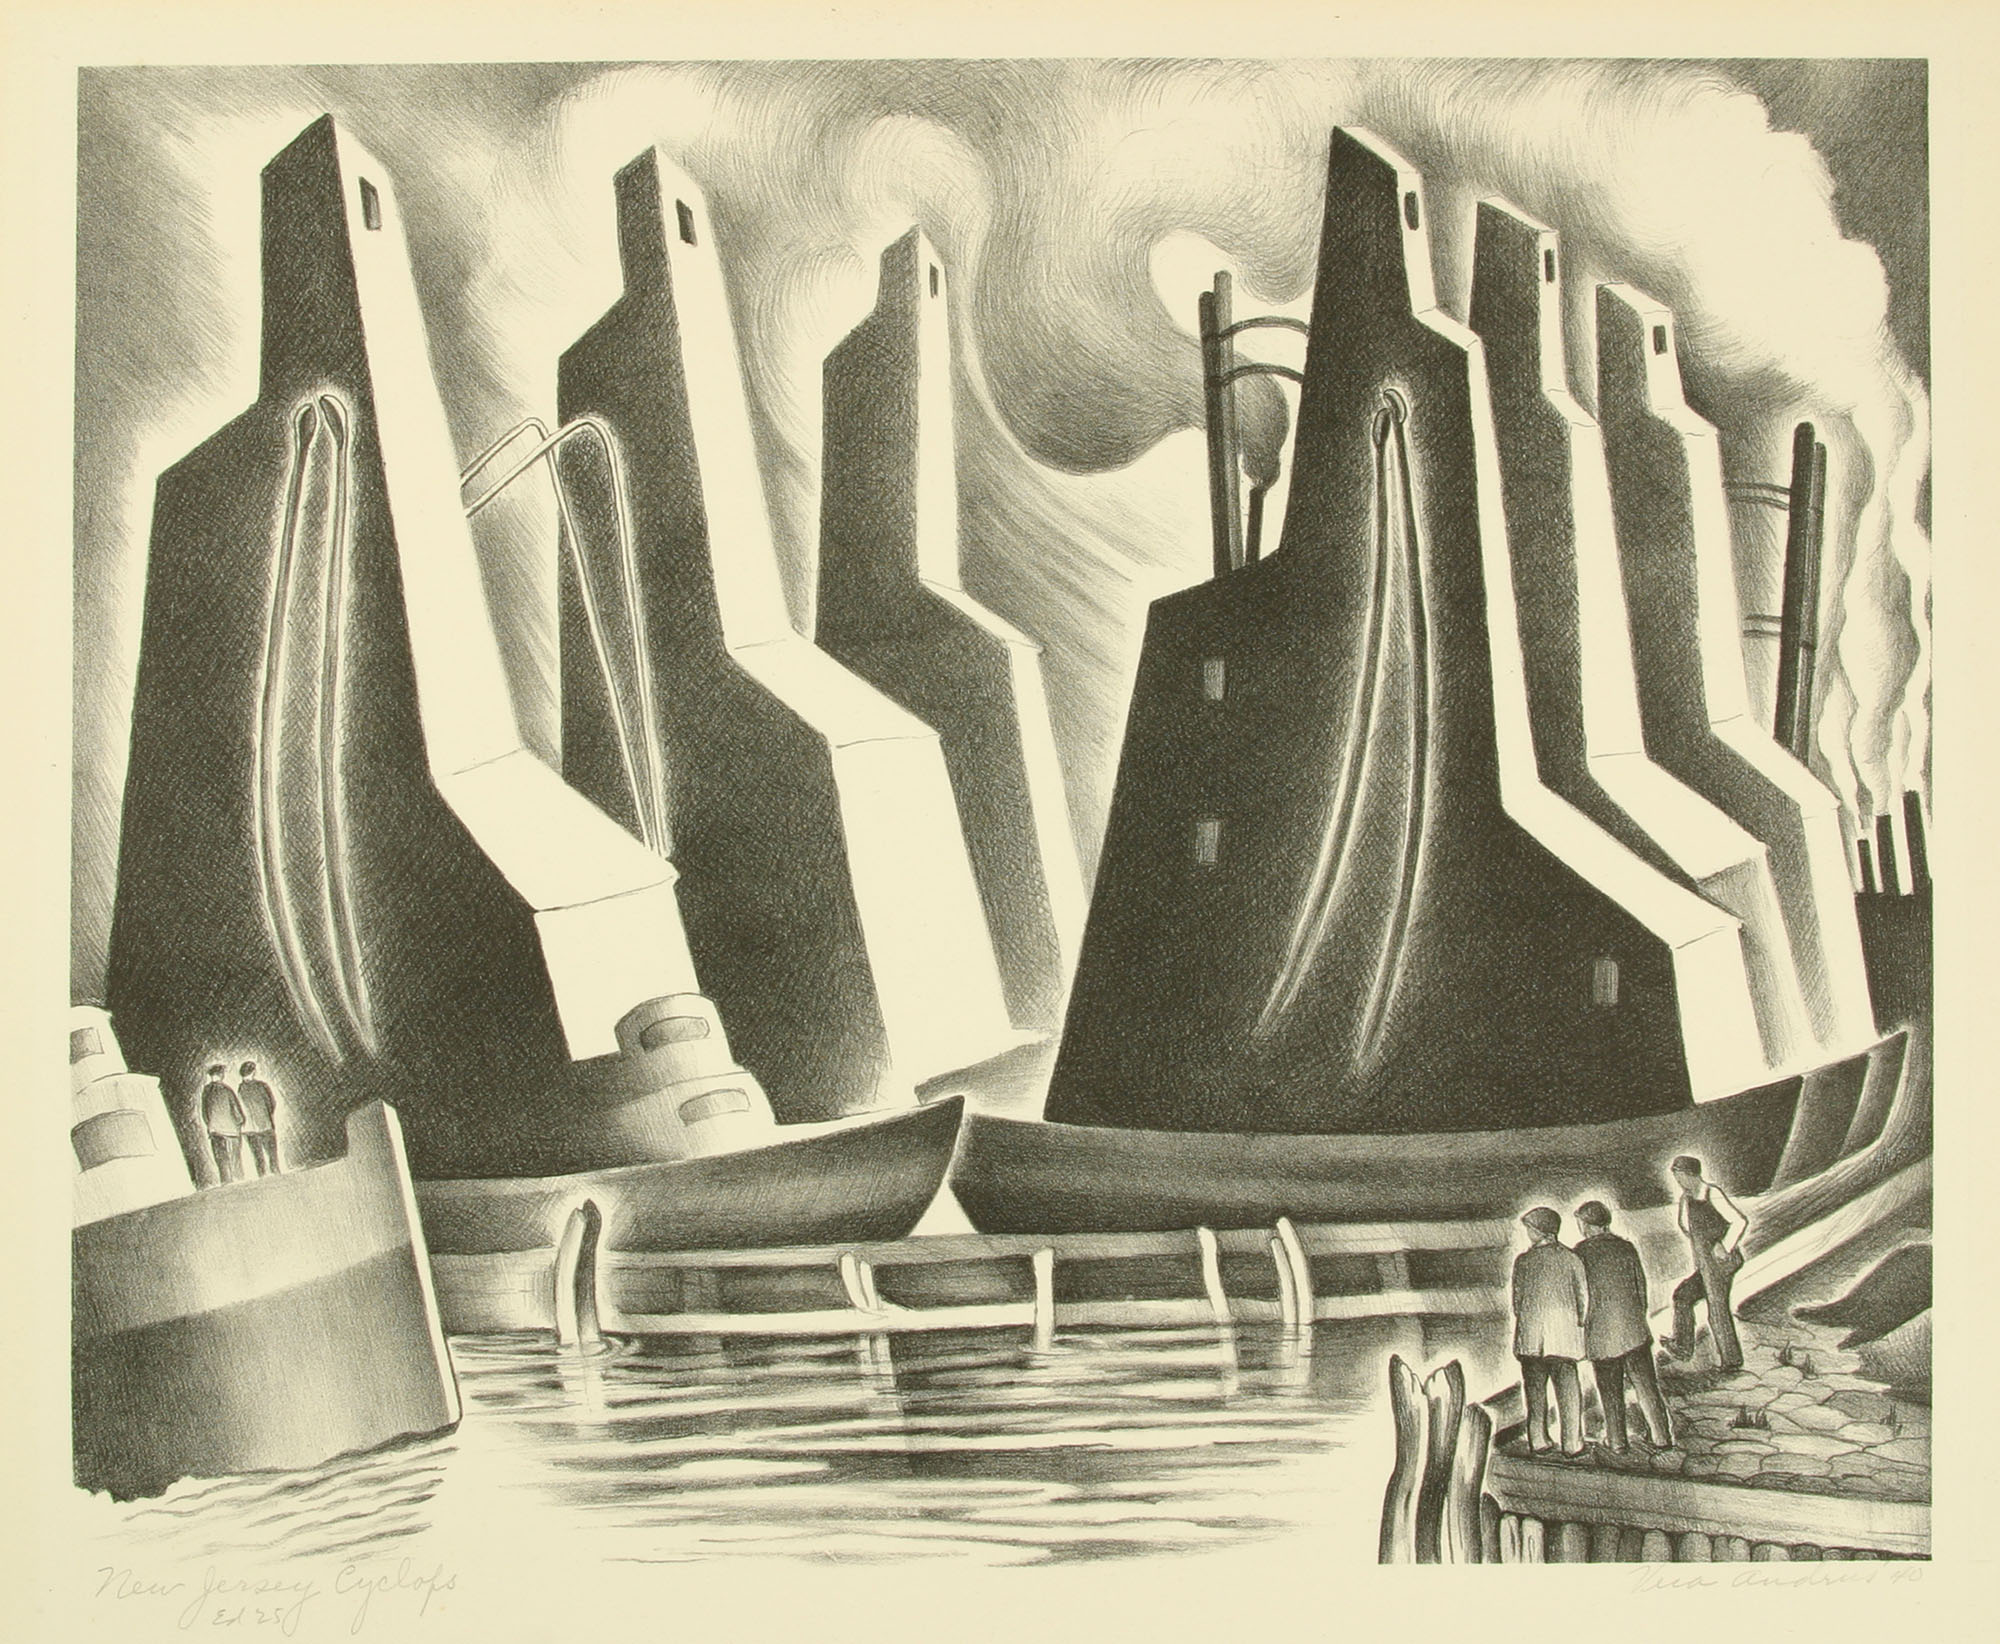 Vera Andrus, New Jersey Cyclops, 1940. Lithograph on white wove paper. Collection of DePaul Art Museum, gift of Belverd and Marian Powers Needles.